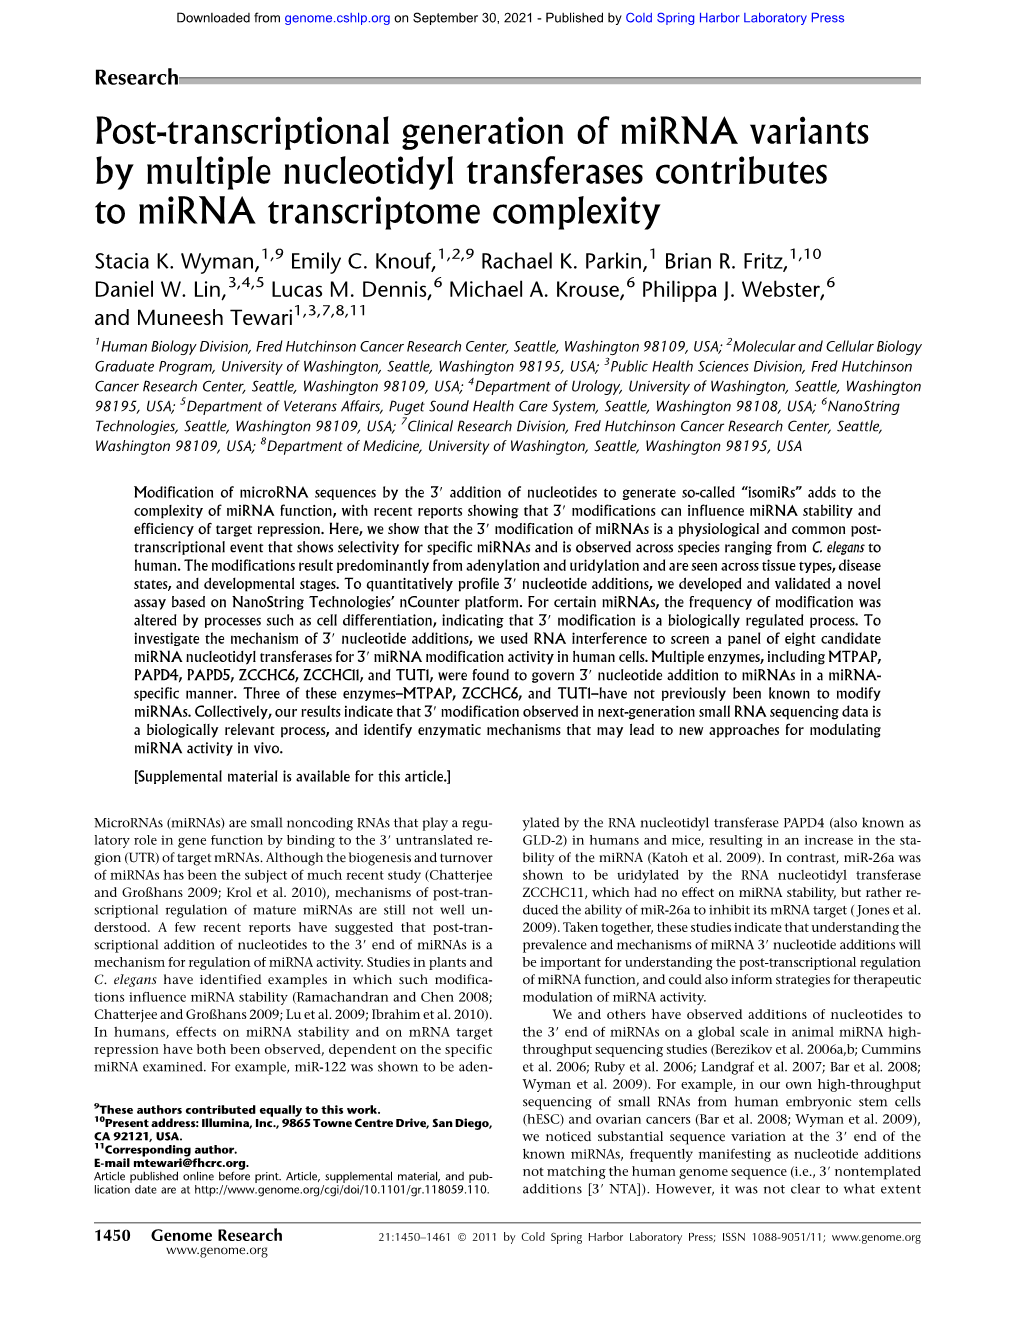 Post-Transcriptional Generation of Mirna Variants by Multiple Nucleotidyl Transferases Contributes to Mirna Transcriptome Complexity